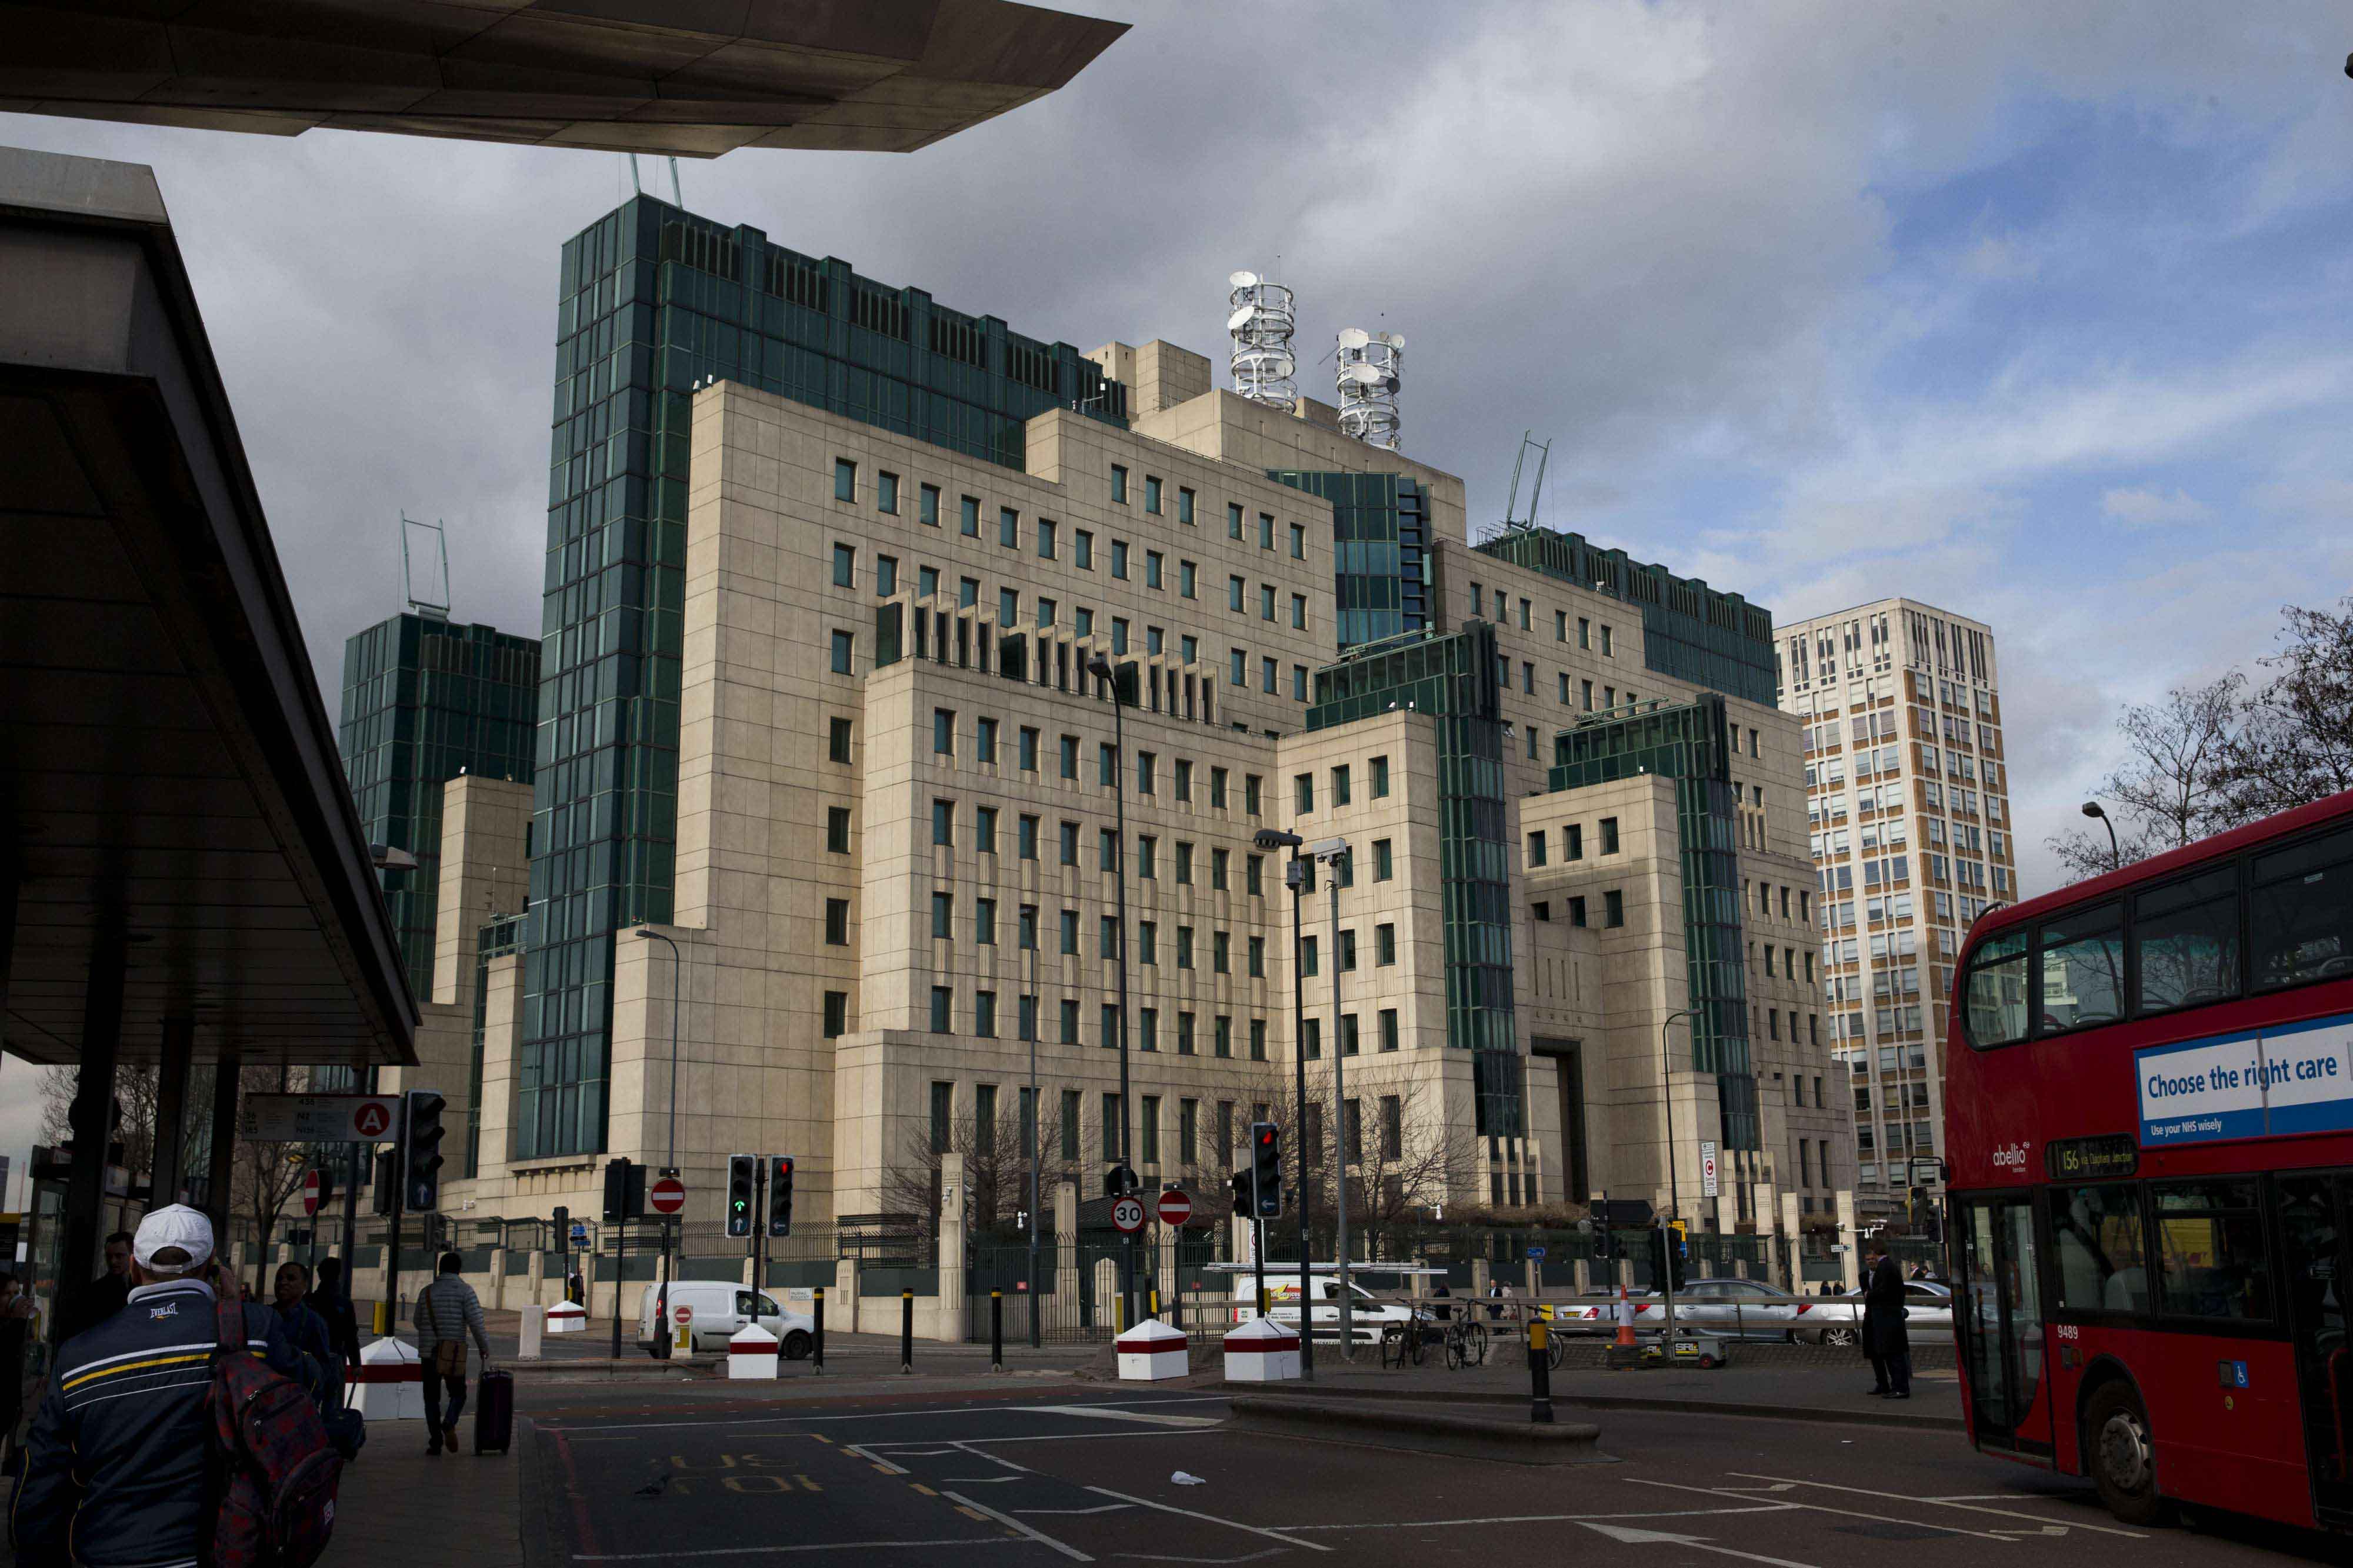 A general view showing the MI6 building in London